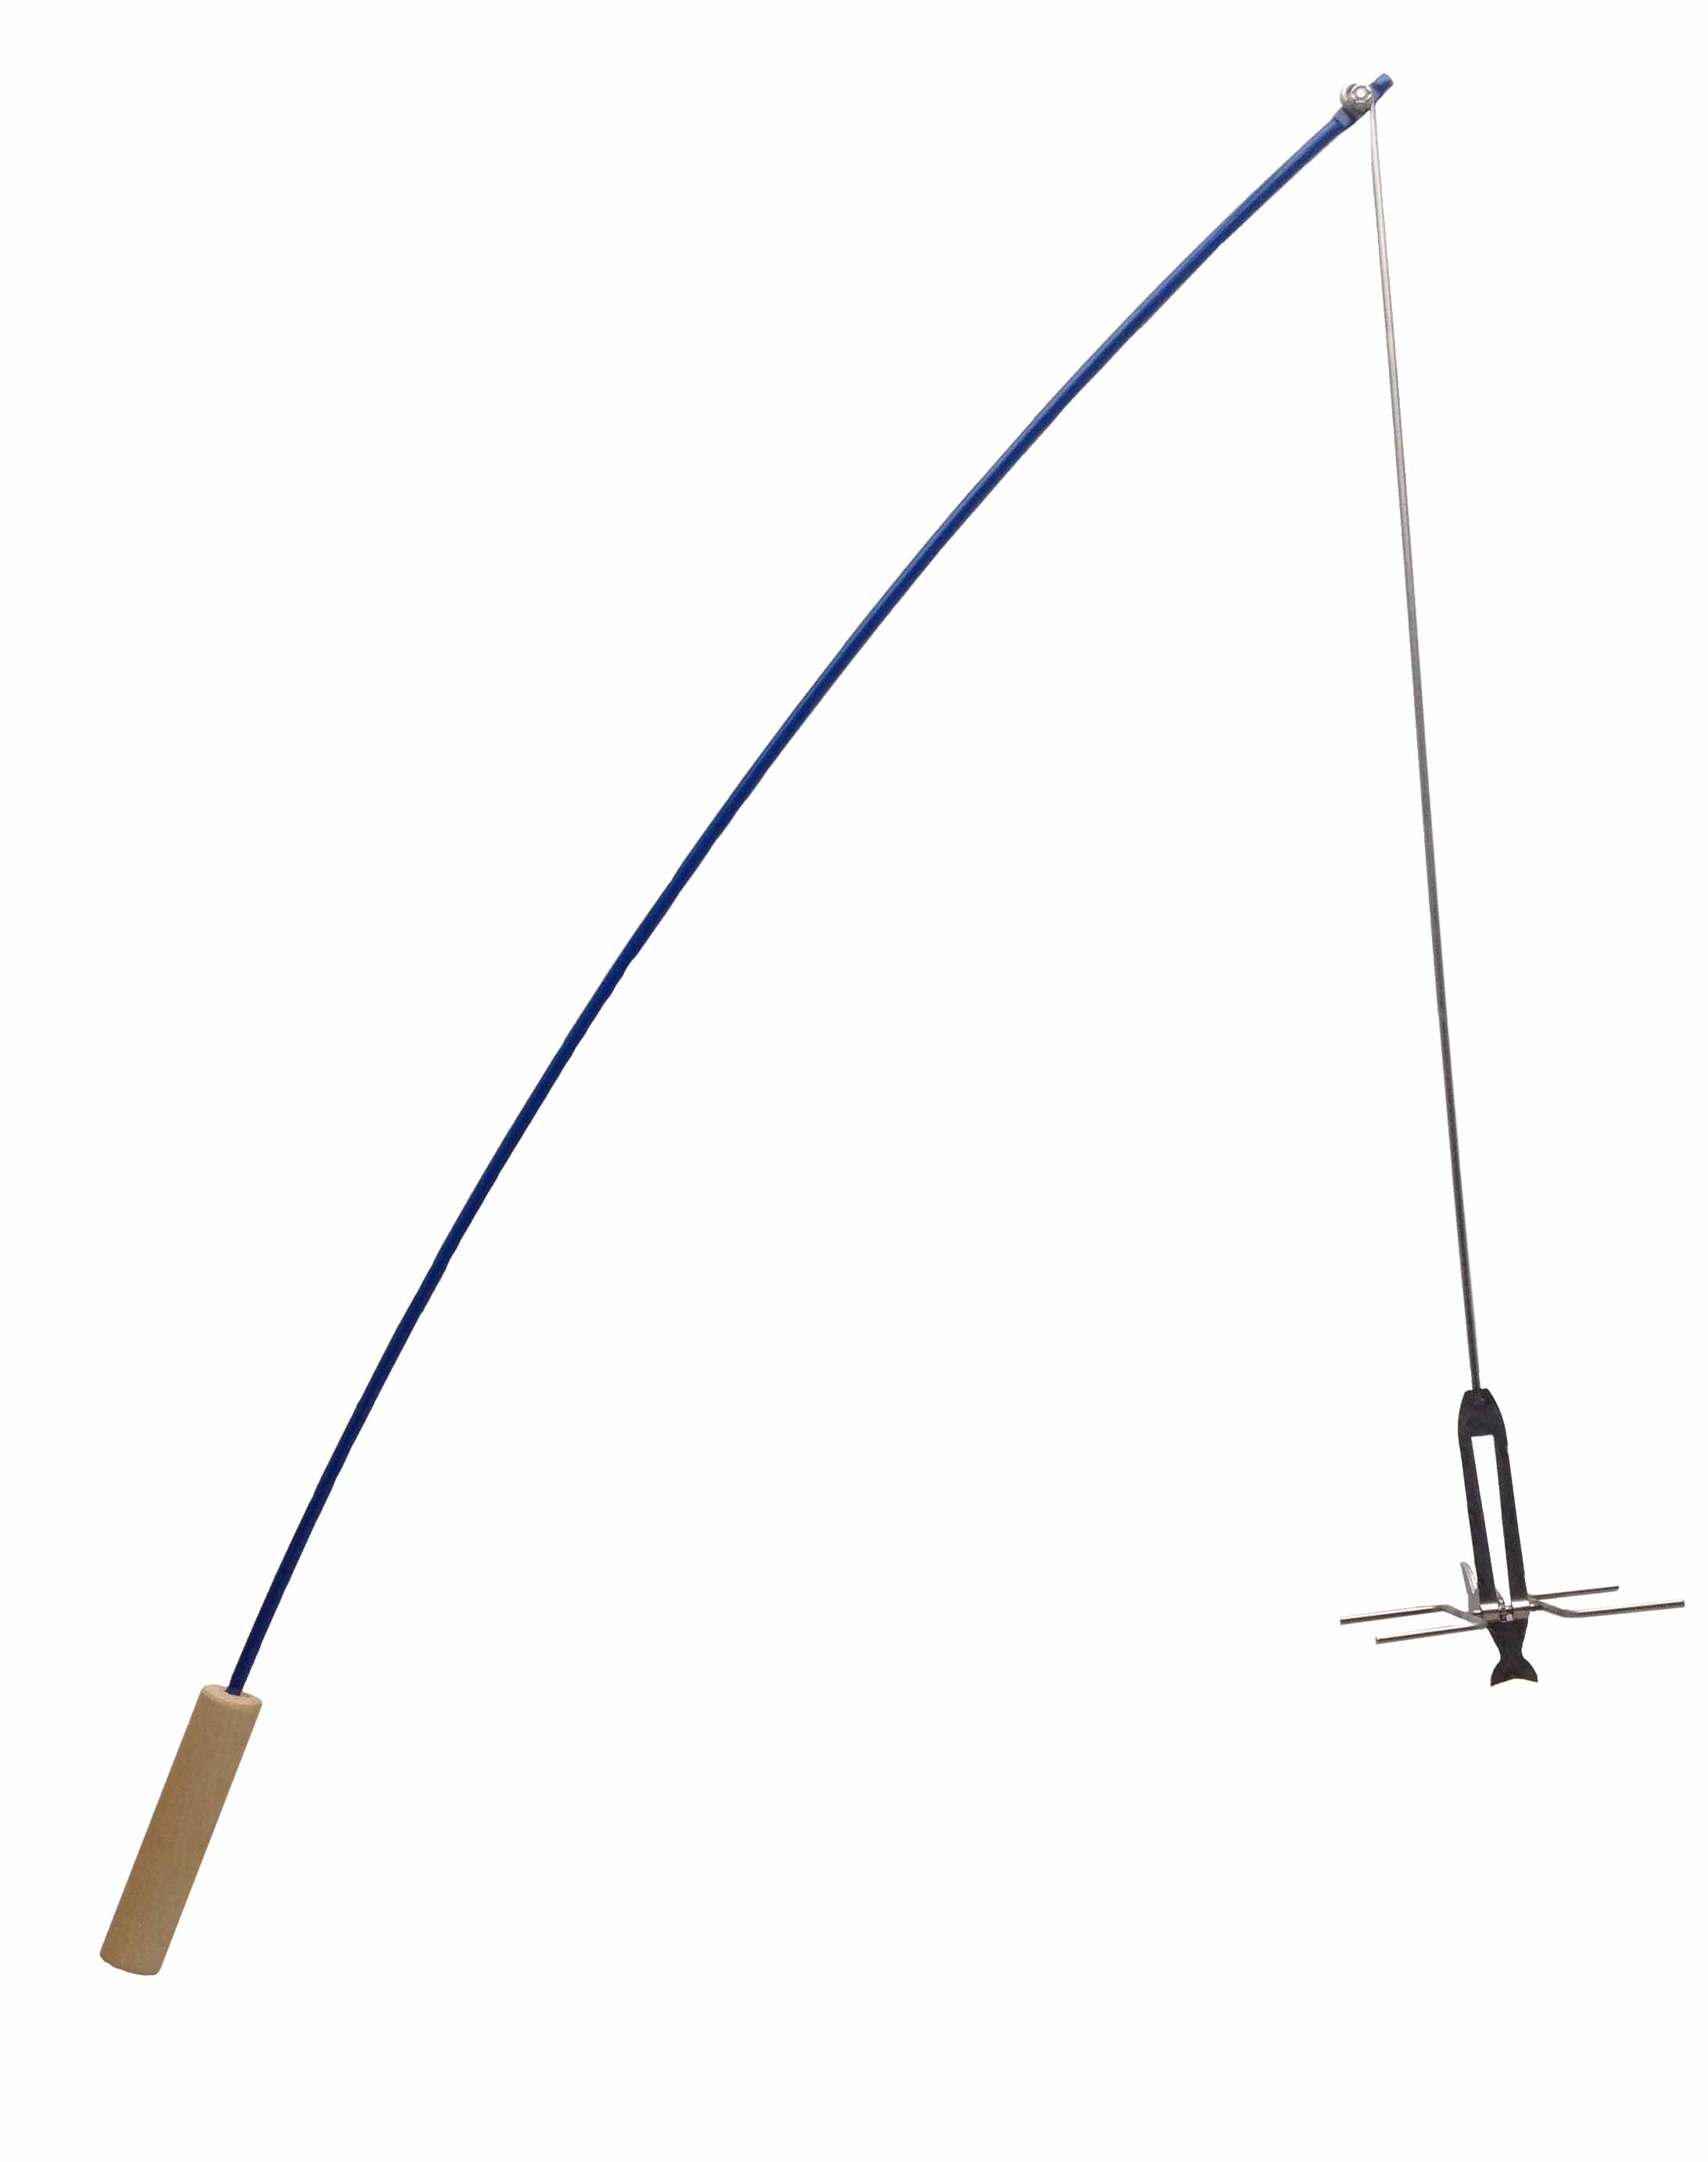 Fishing pole images free download fishing rod clipart 2 image